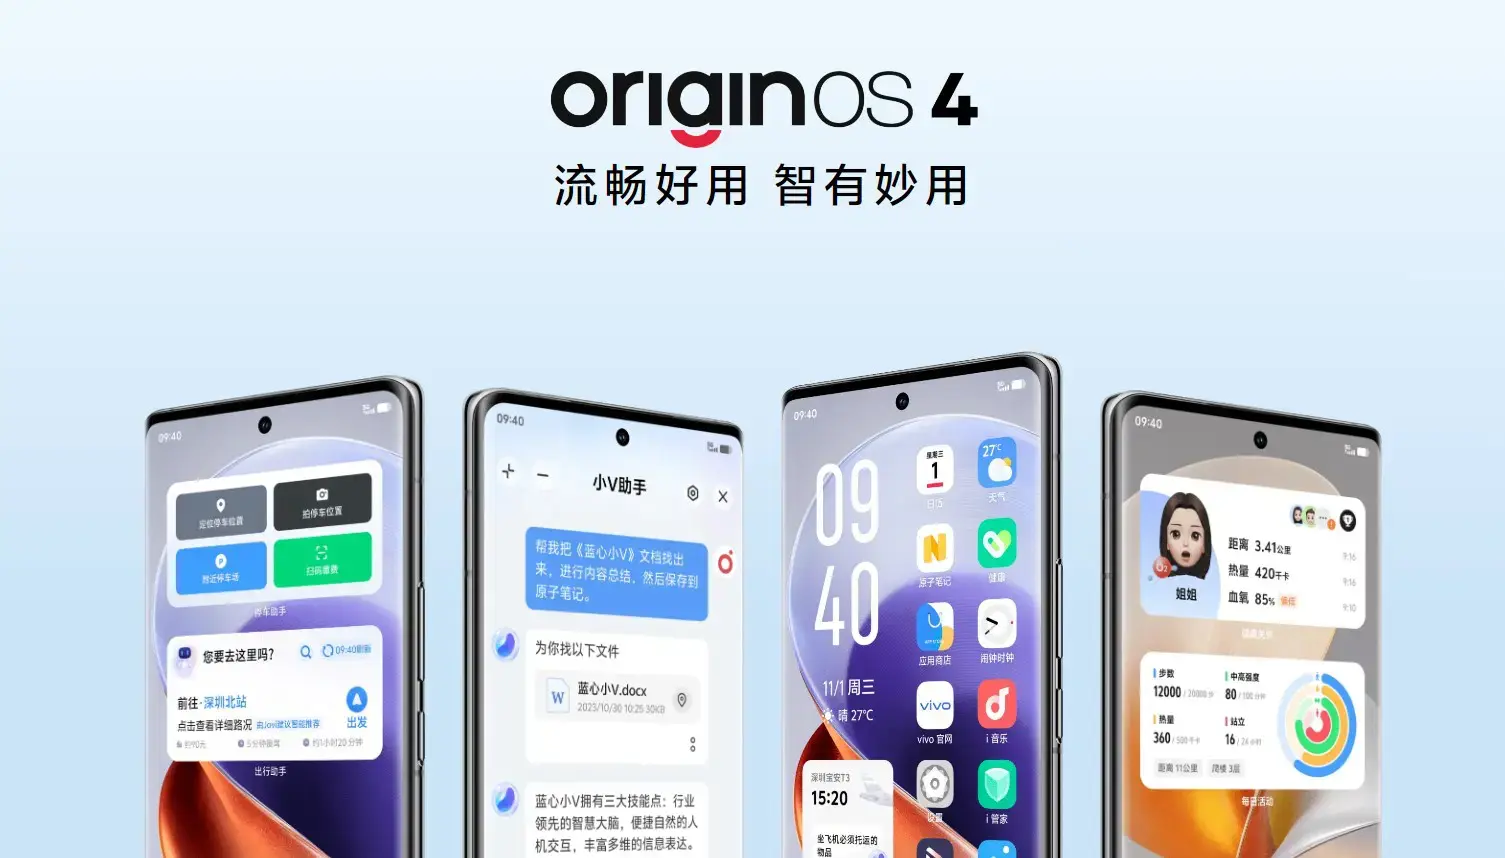 OriginOS 4 is vivo's new firmware that optimises memory, reduces power consumption and improves uptime